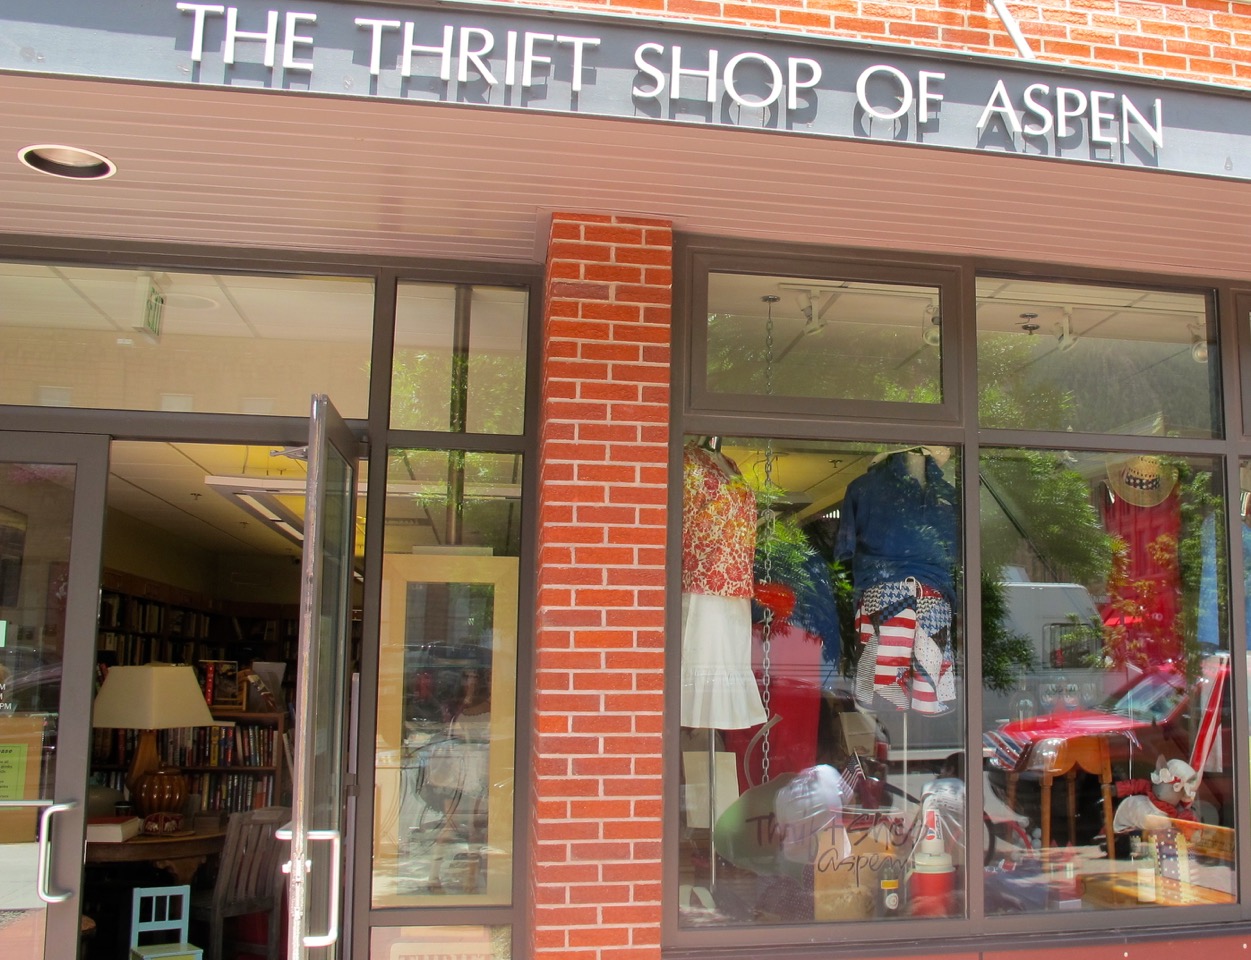 Look for Oscar-winners at the Thirft Shop of Aspen. Photo by Marla Norman.